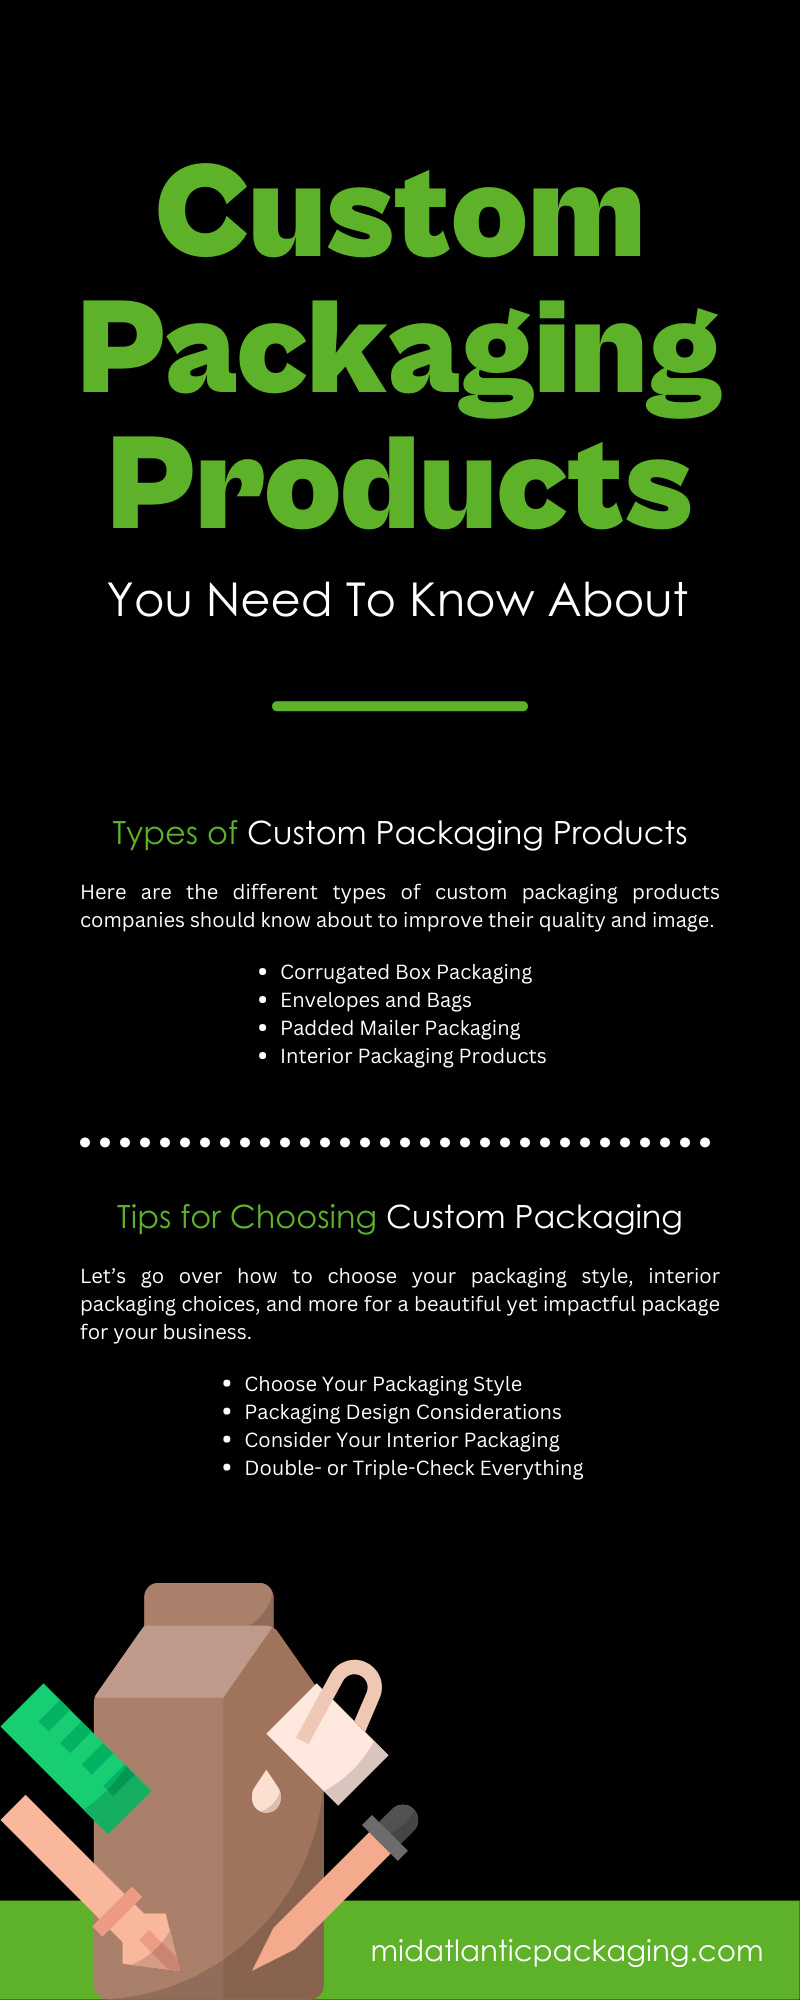 Custom Packaging Products You Need To Know About